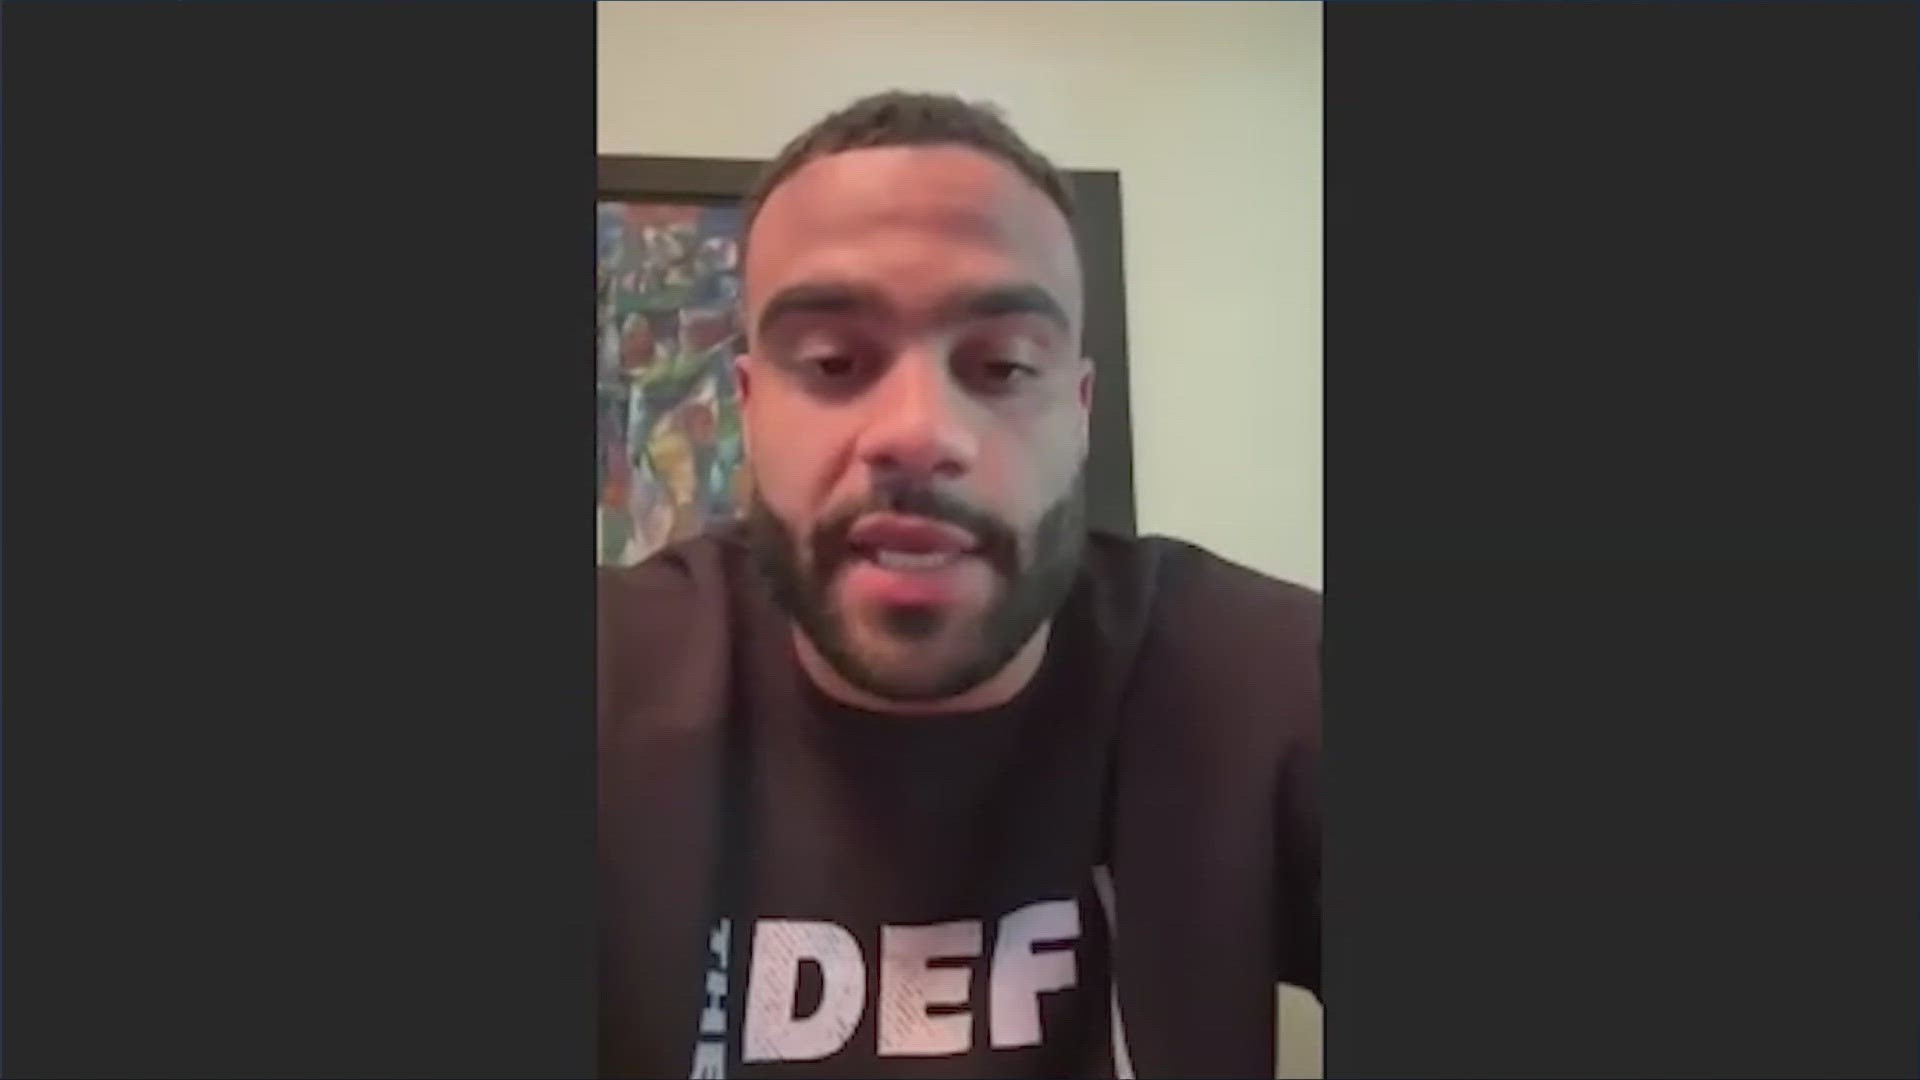 Solomon Thomas, who went to high school in Coppell, Texas, was one of the top donators to families affected by the Allen mall shooting.